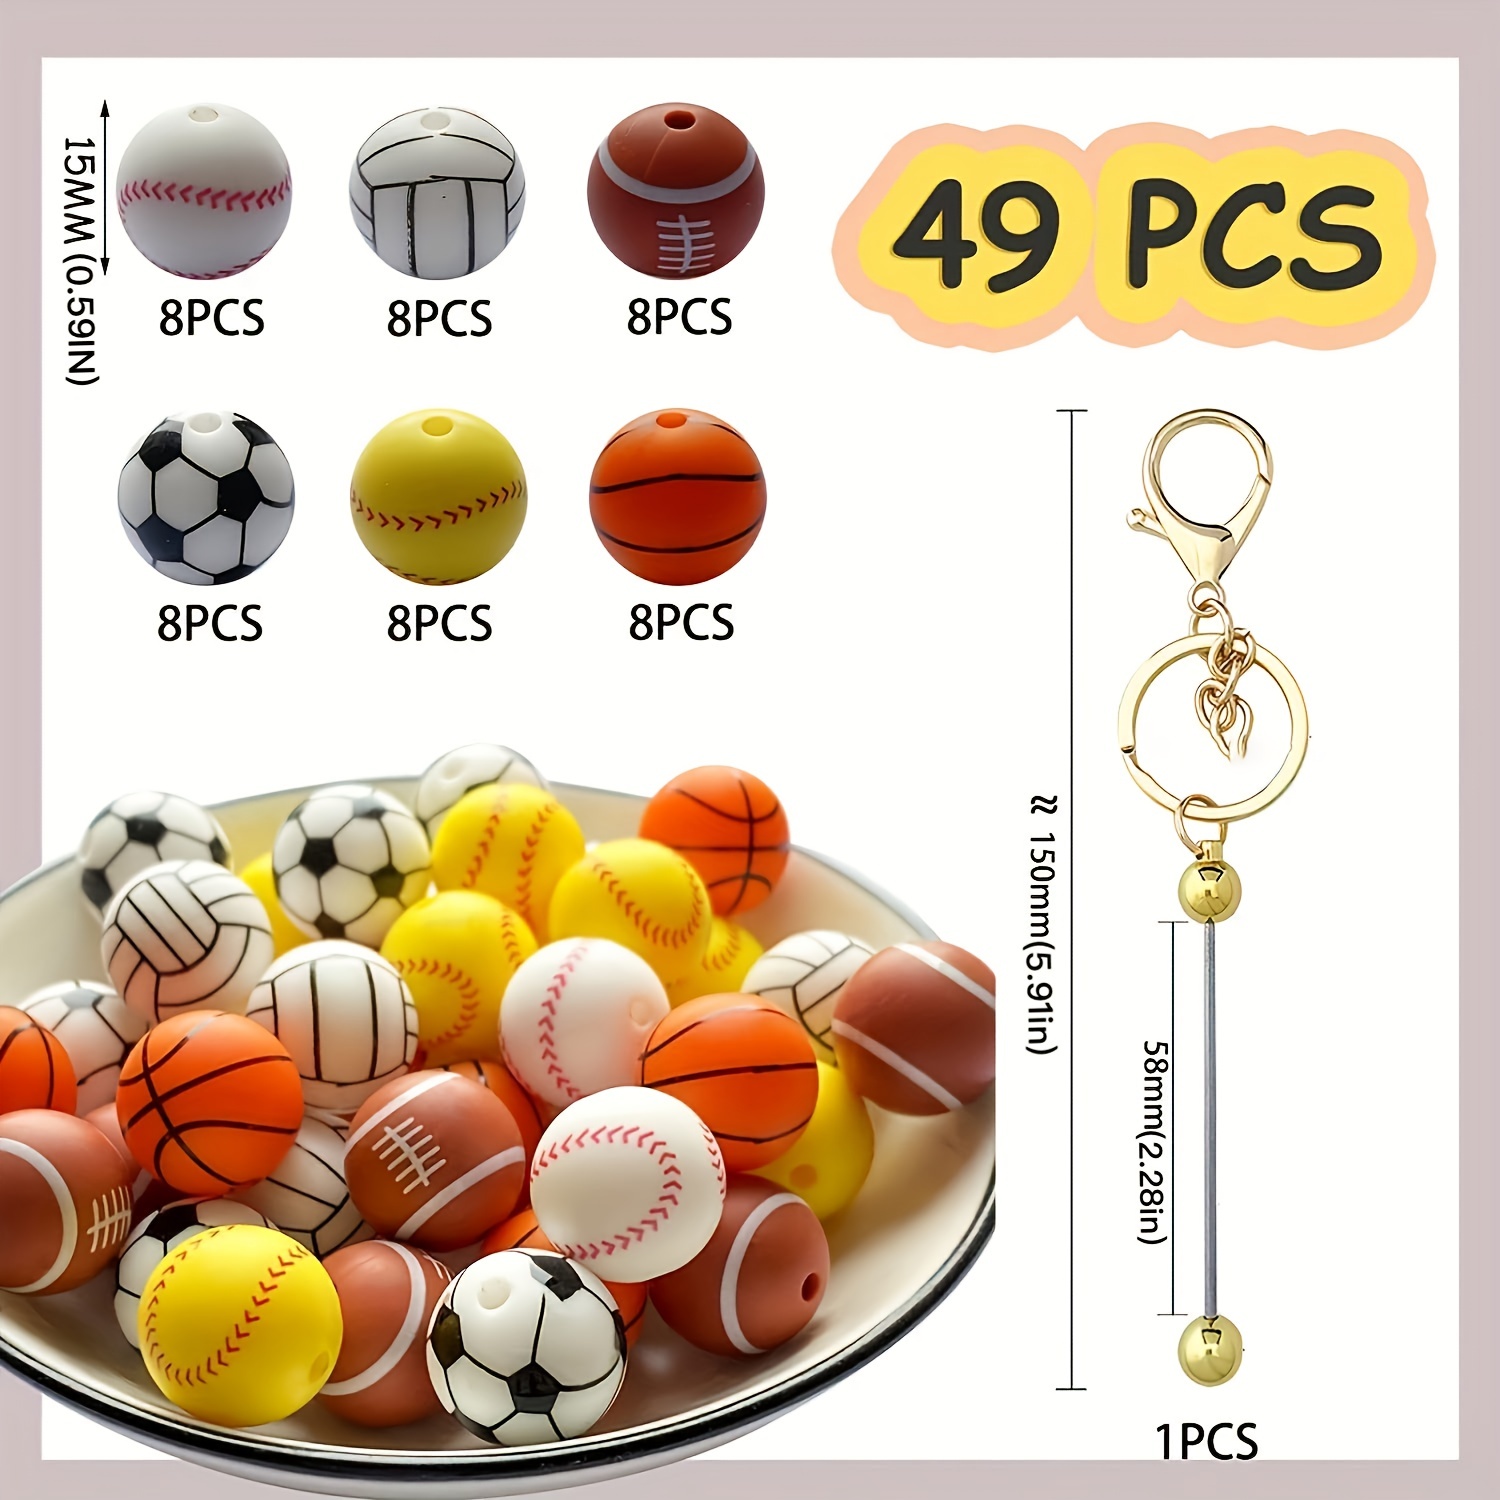 TOPHONIEX Sports Silicone Beads 15mm Silicone Beads Round Rubber Beads  Baseball Softball Football Beads for Keychain Making DIY Crafts Bracelet